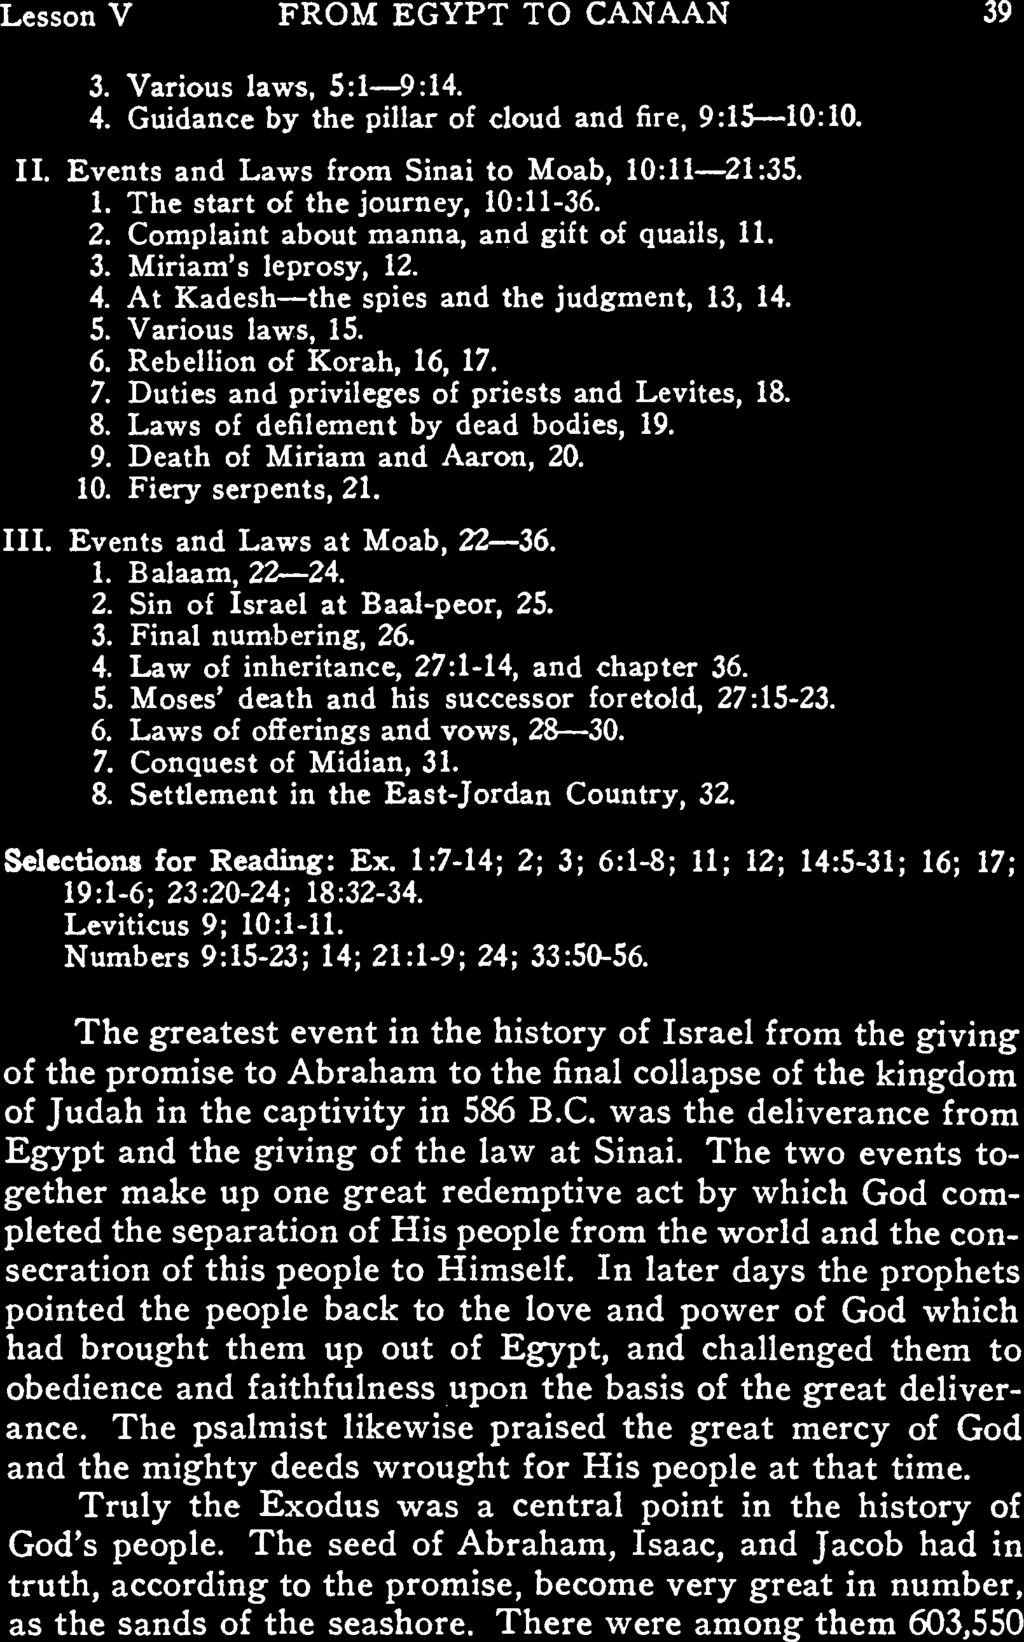 Lesson V FROM EGYPT TO CANAAN 39 3. Vrious lws, 5:1 9:14. 4. Guidnce by the pillr of cloud nd fire, 9:15 10:10. II. Events nd Lws from Sini to Mob, 10:11 21:35. 1. The strt of the journey, 10:11-36.